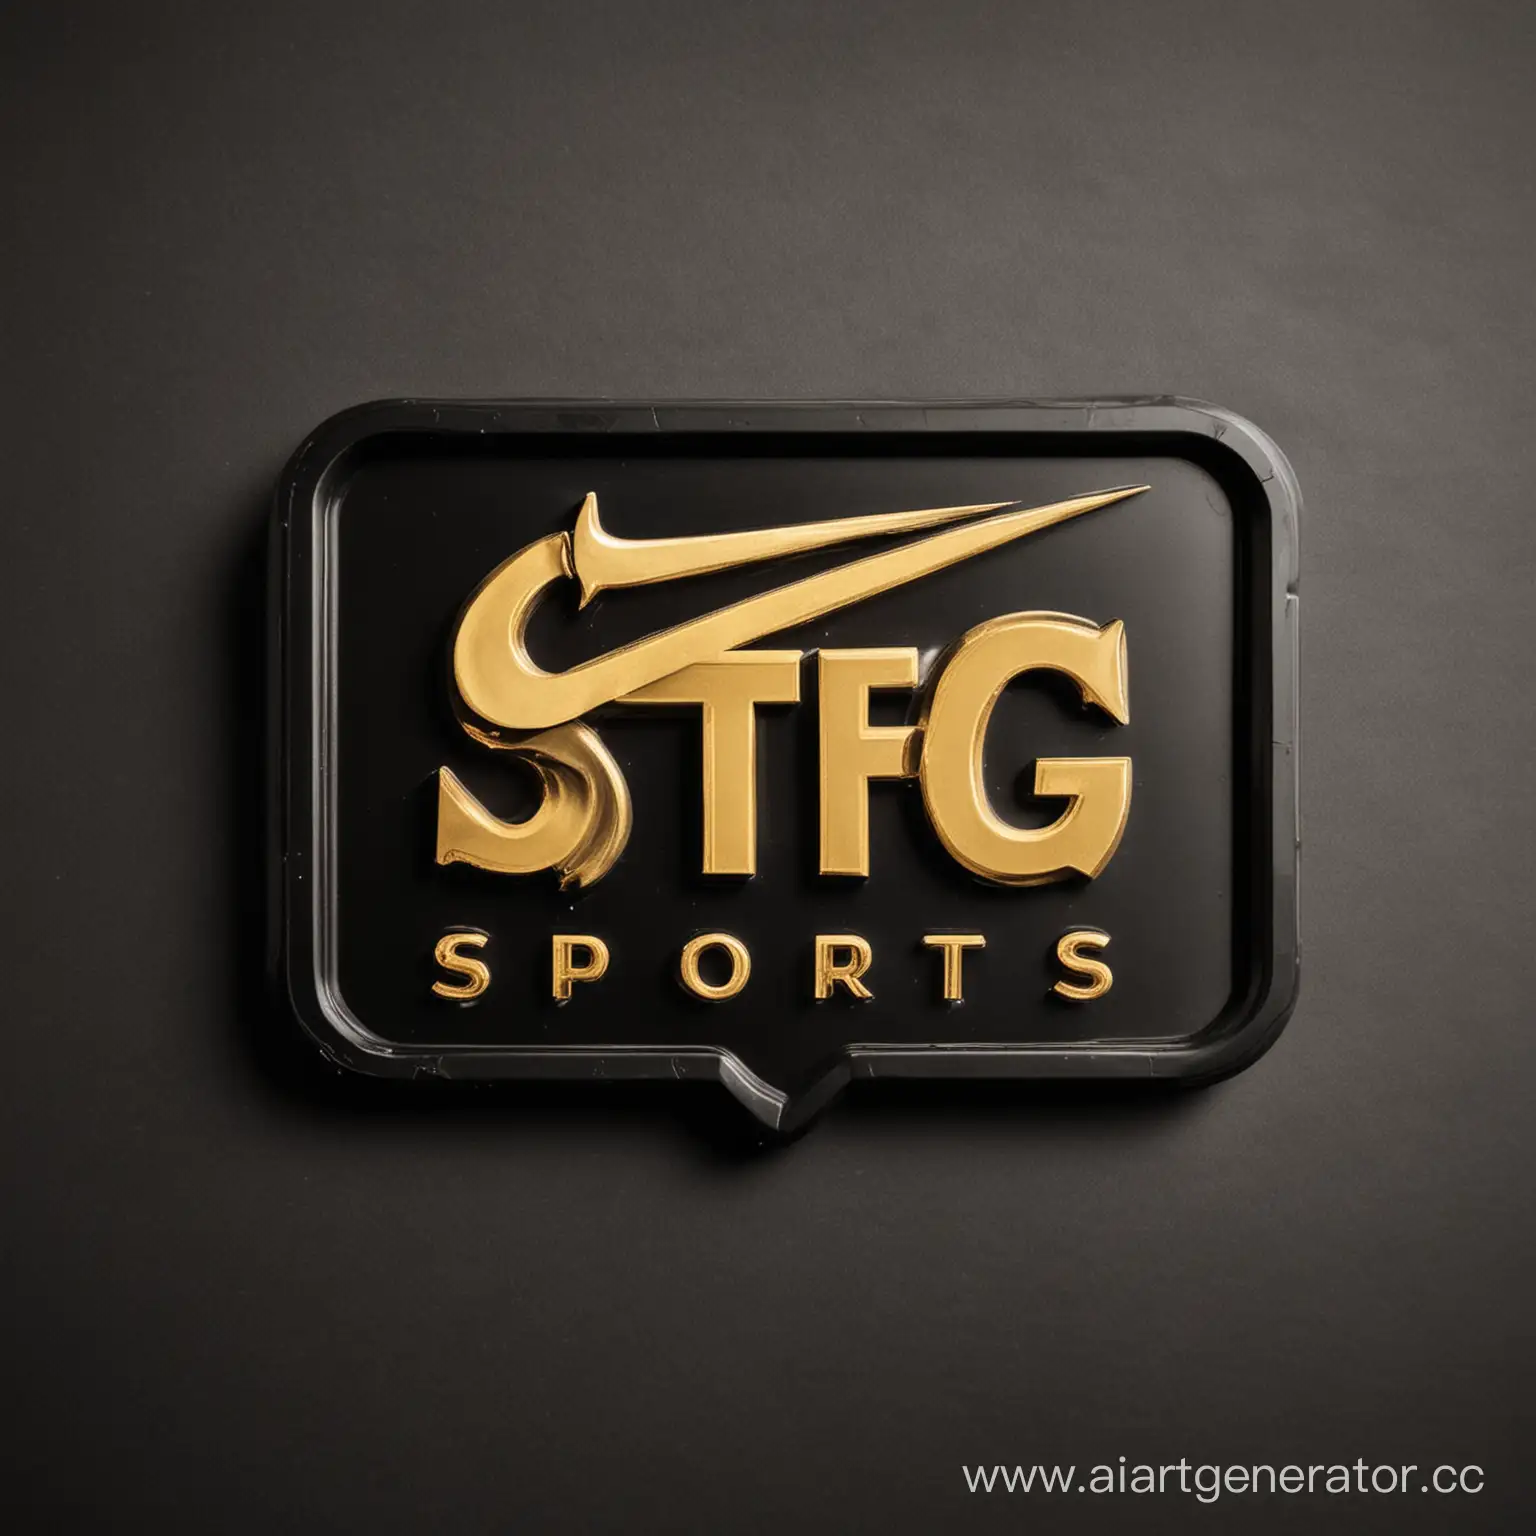 The logo of the STEG sports company in black and gold, looks like NIke and a gas station